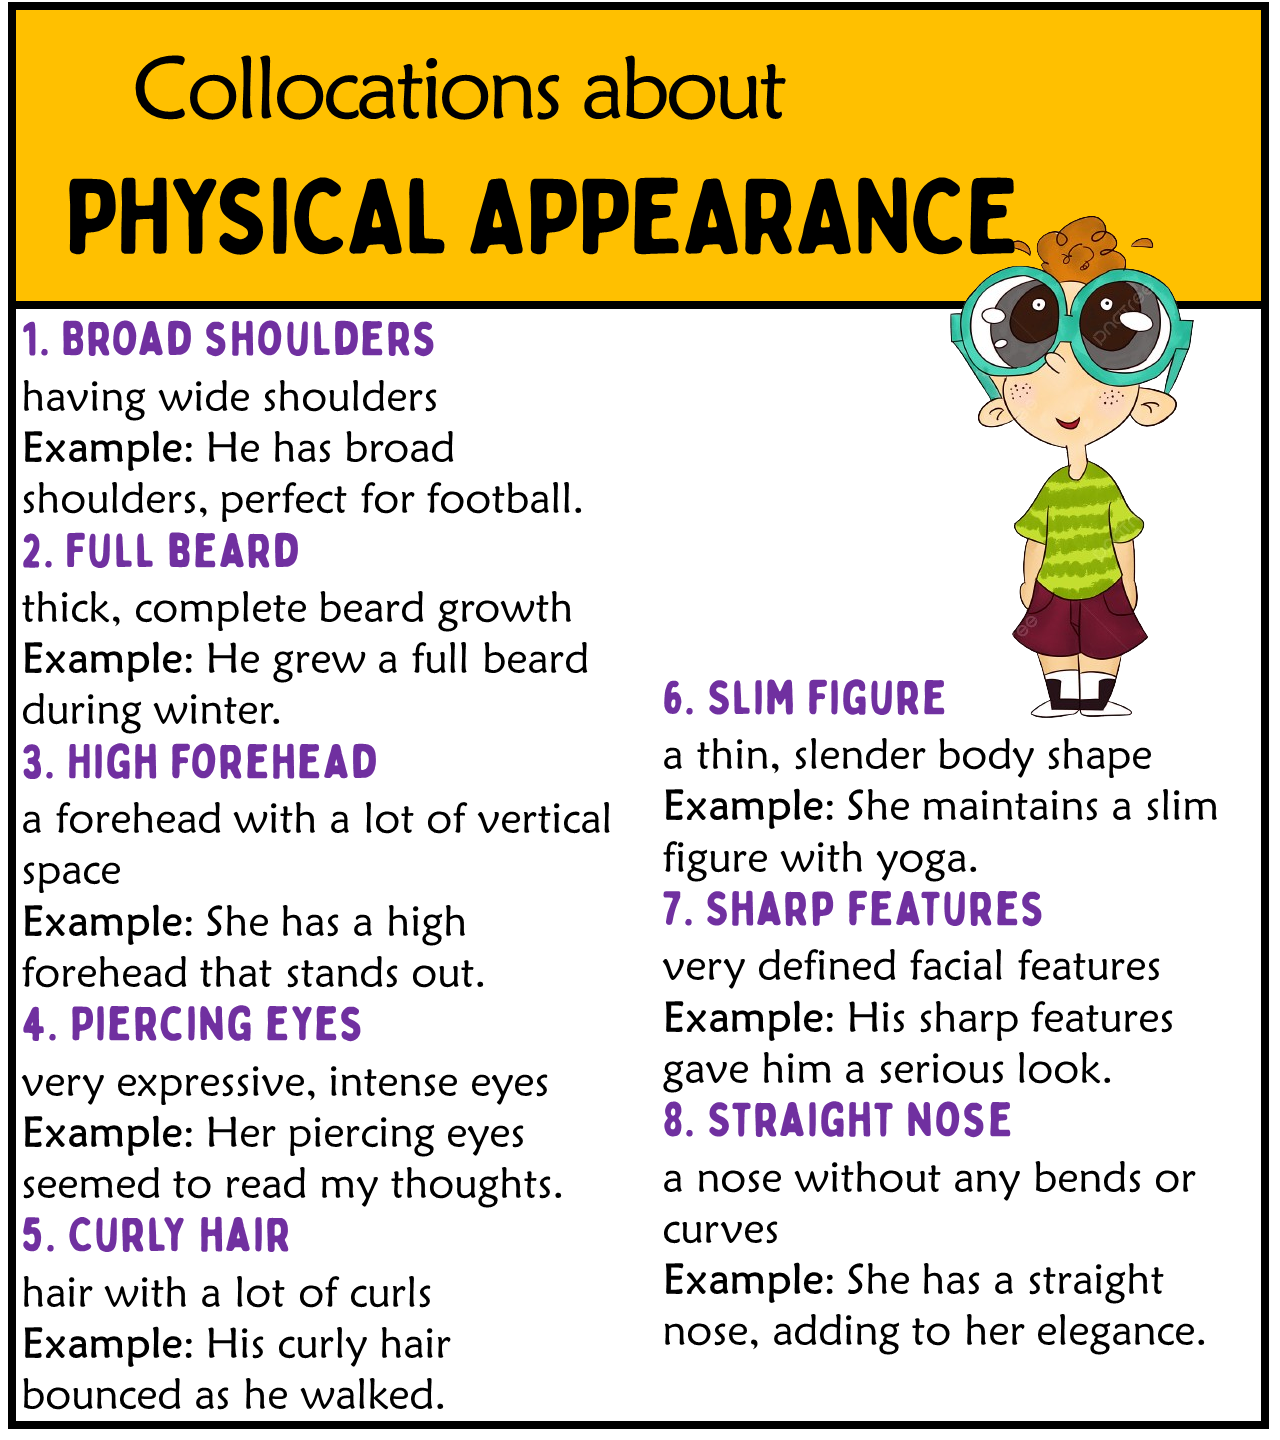 Collocations about Physical Appearance